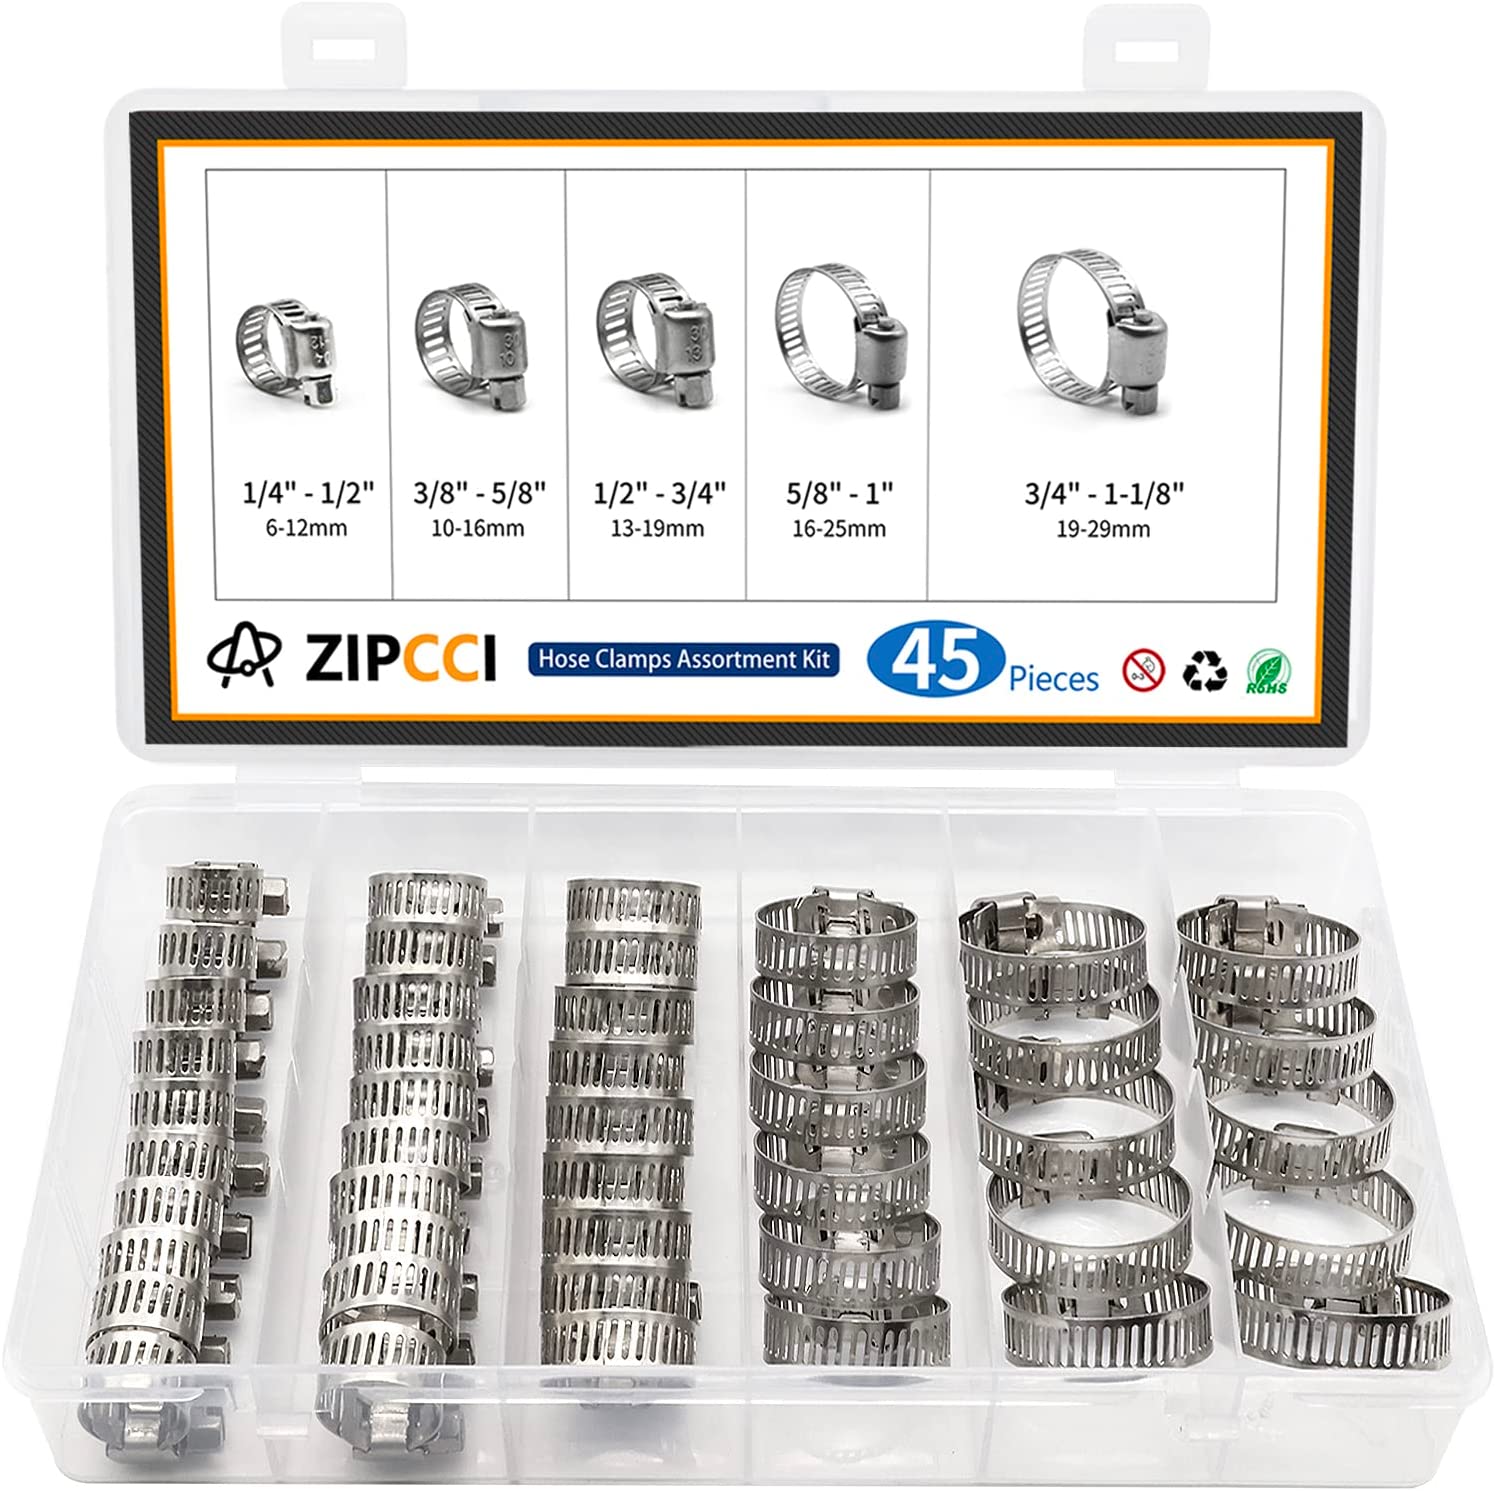 ZIPCCI Hose Clamp Assortment, 45 Pack Stainless Steel [...]